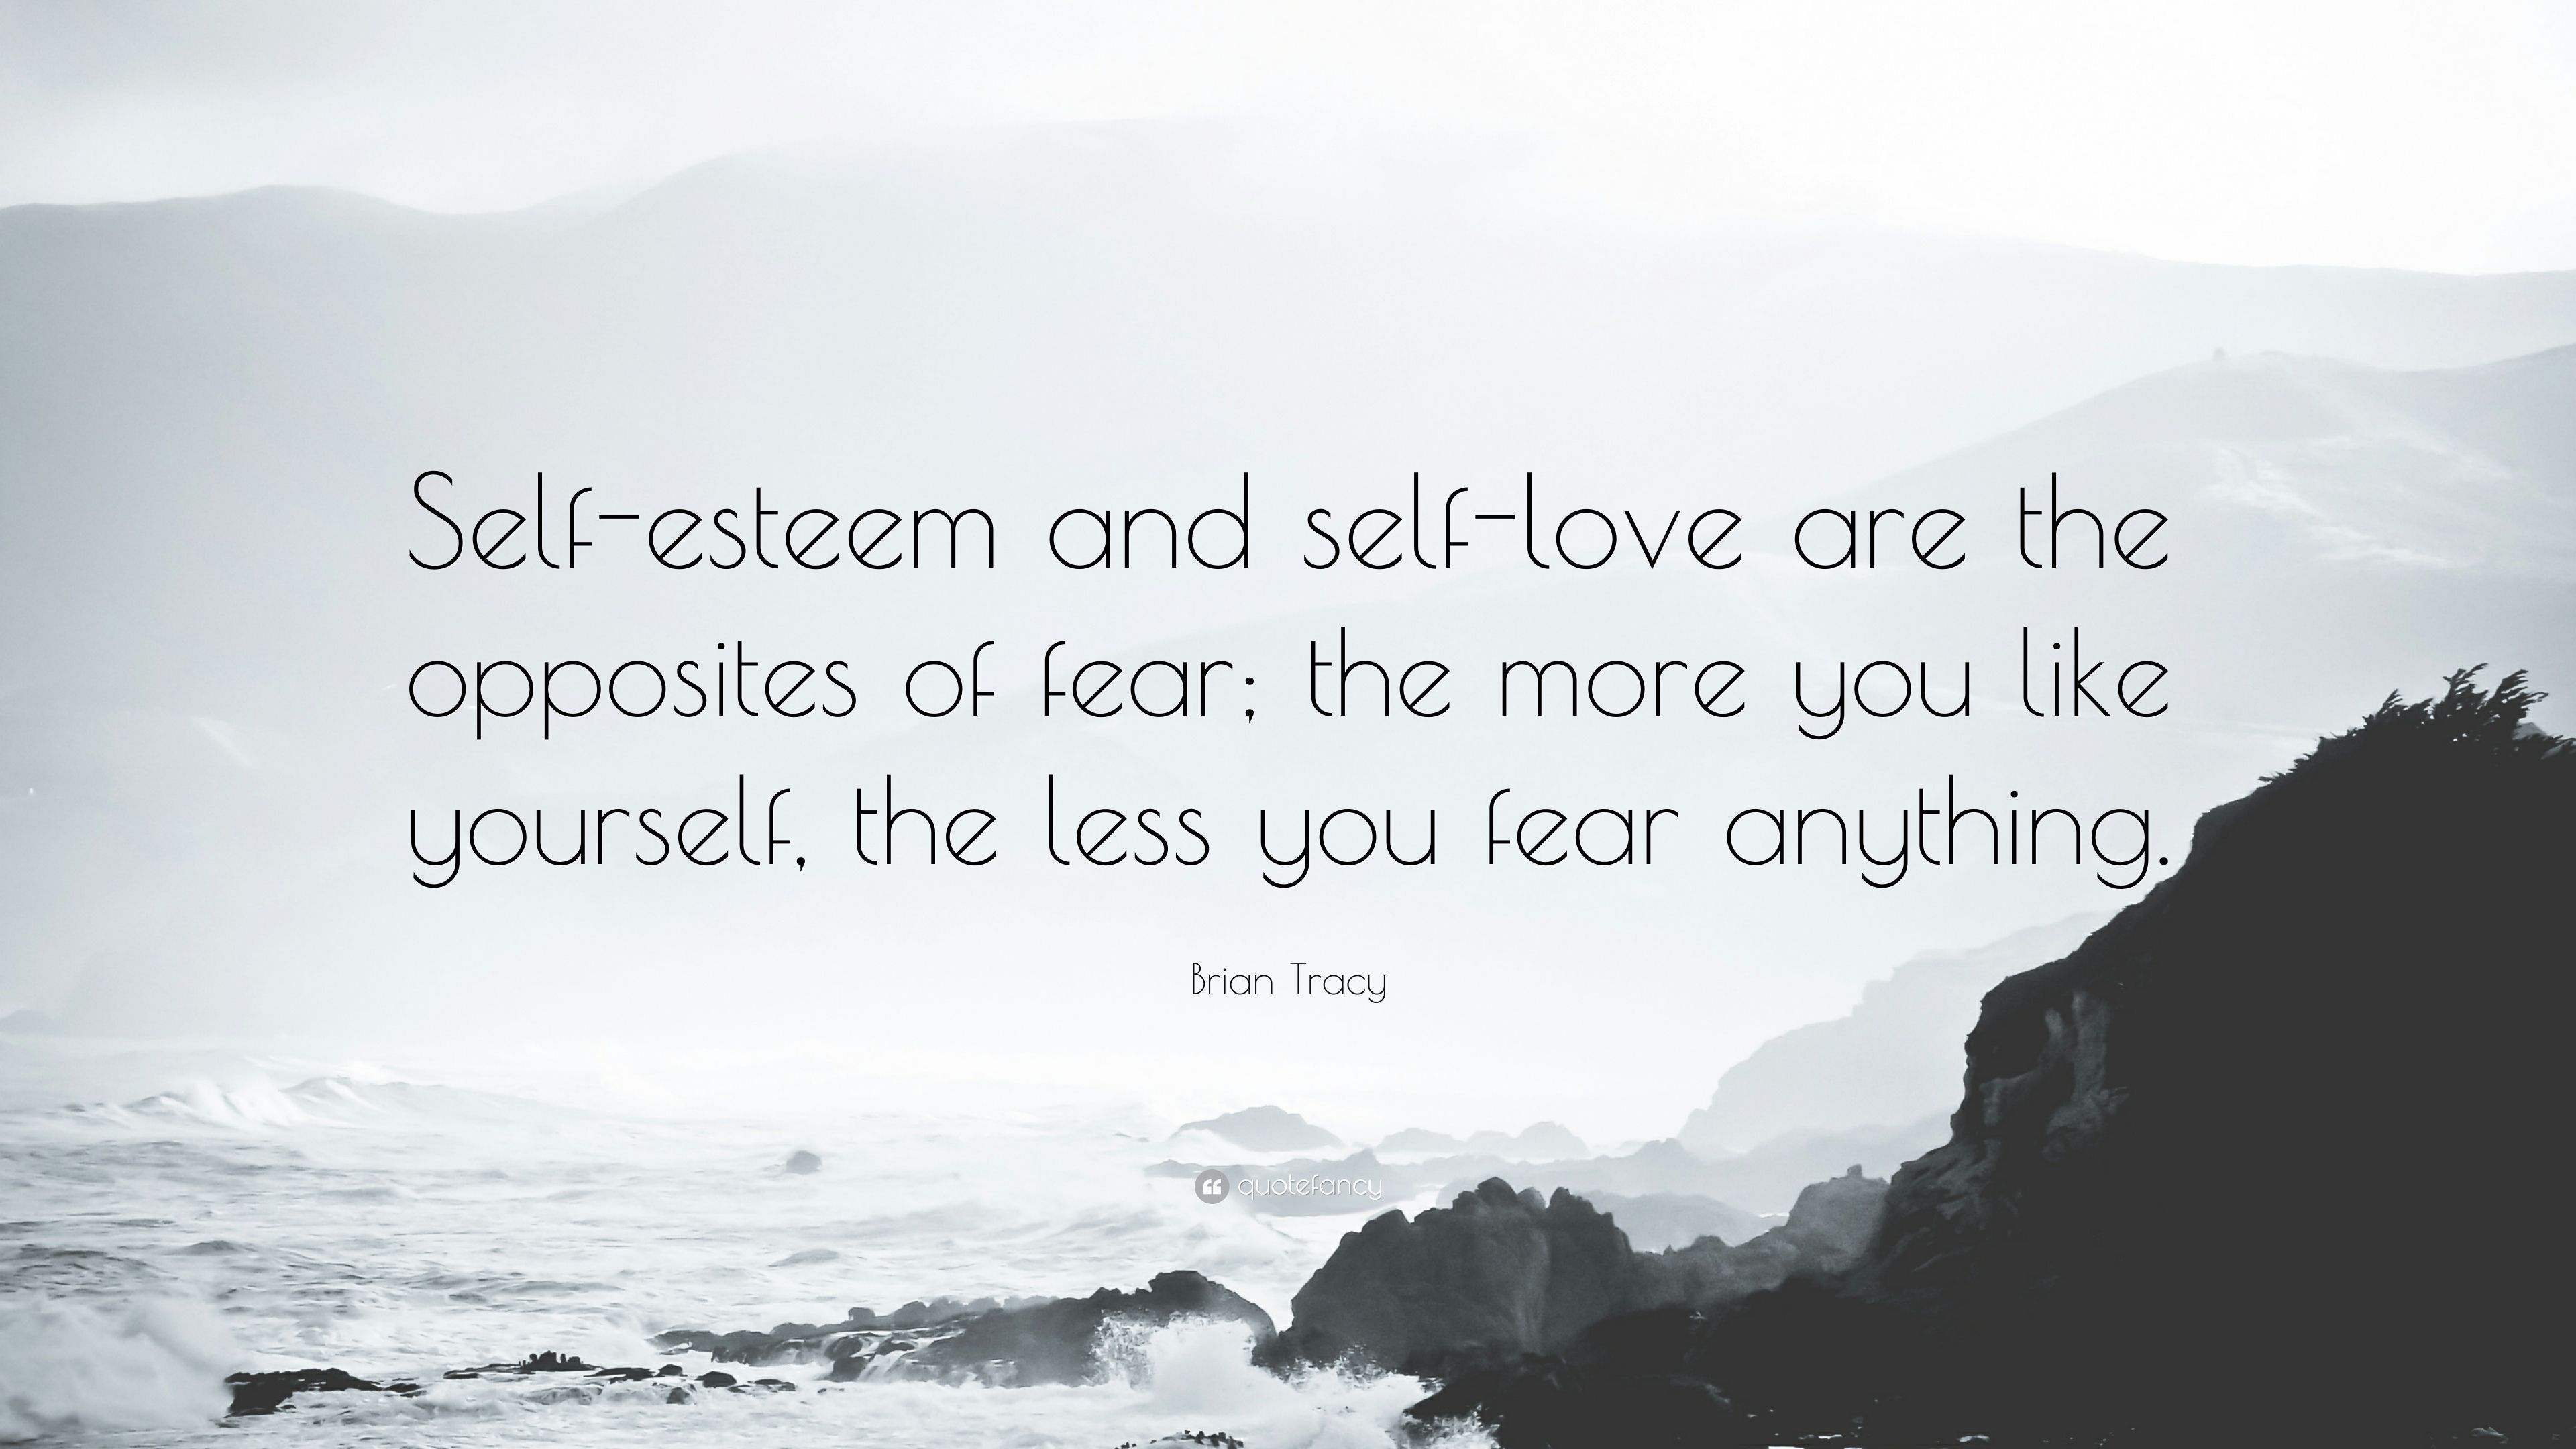 Quotes About Self Esteem And Confidence